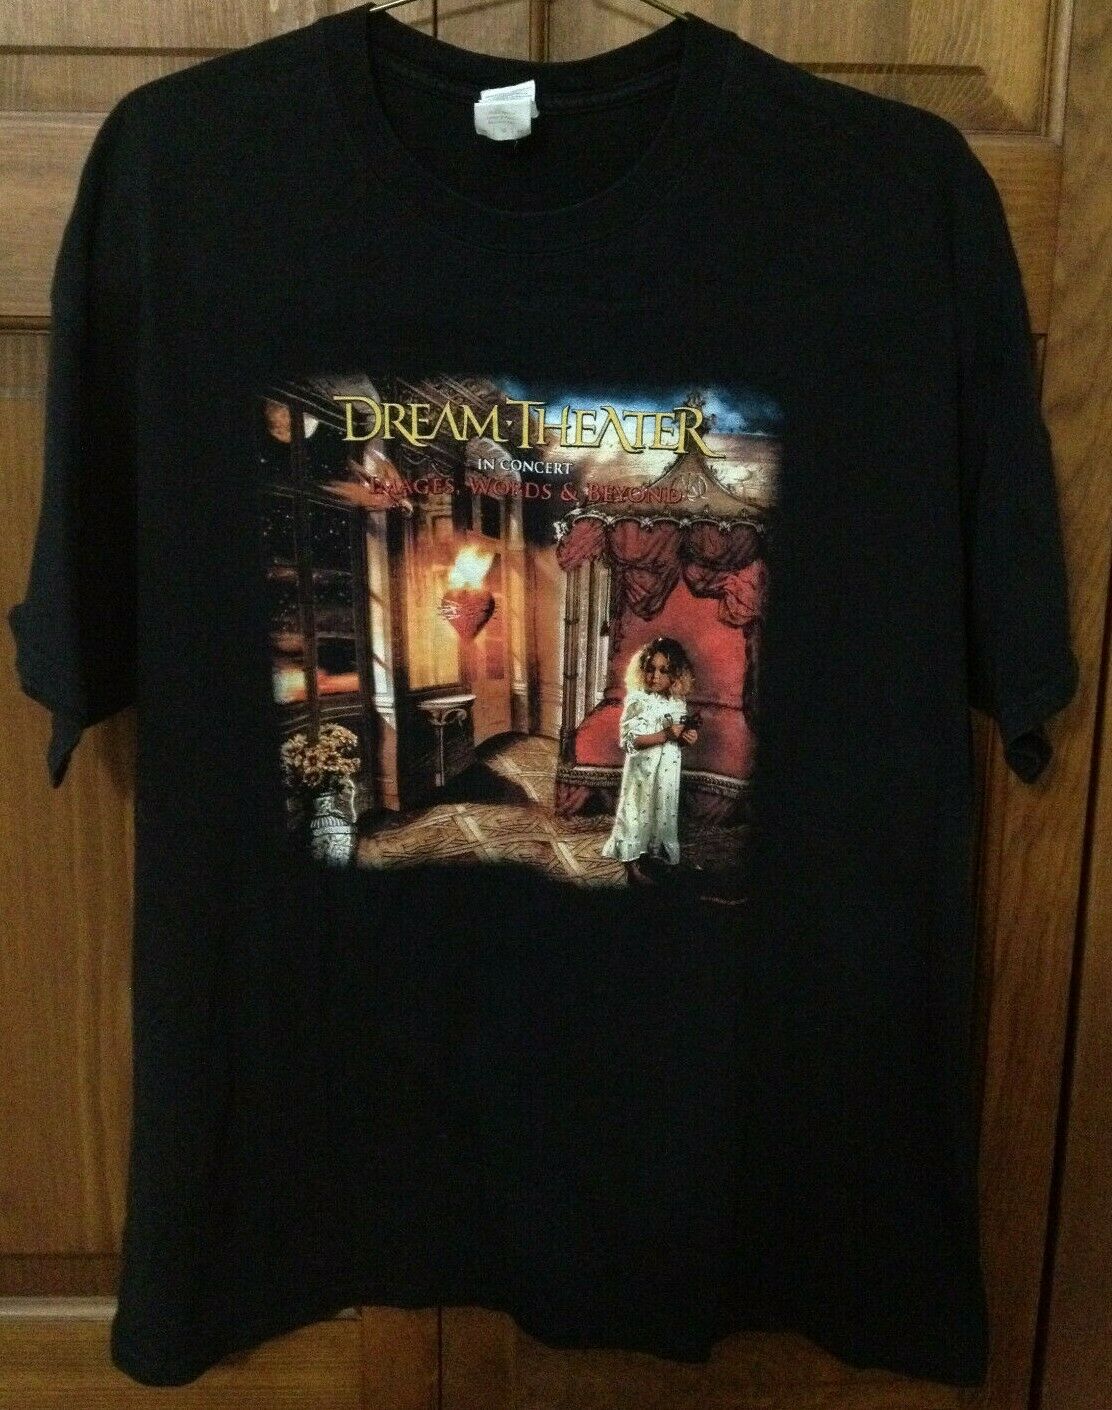 Dream Theater Images Words & Beyond 25th Anniversary Tour Concert T-Shirt (XL)